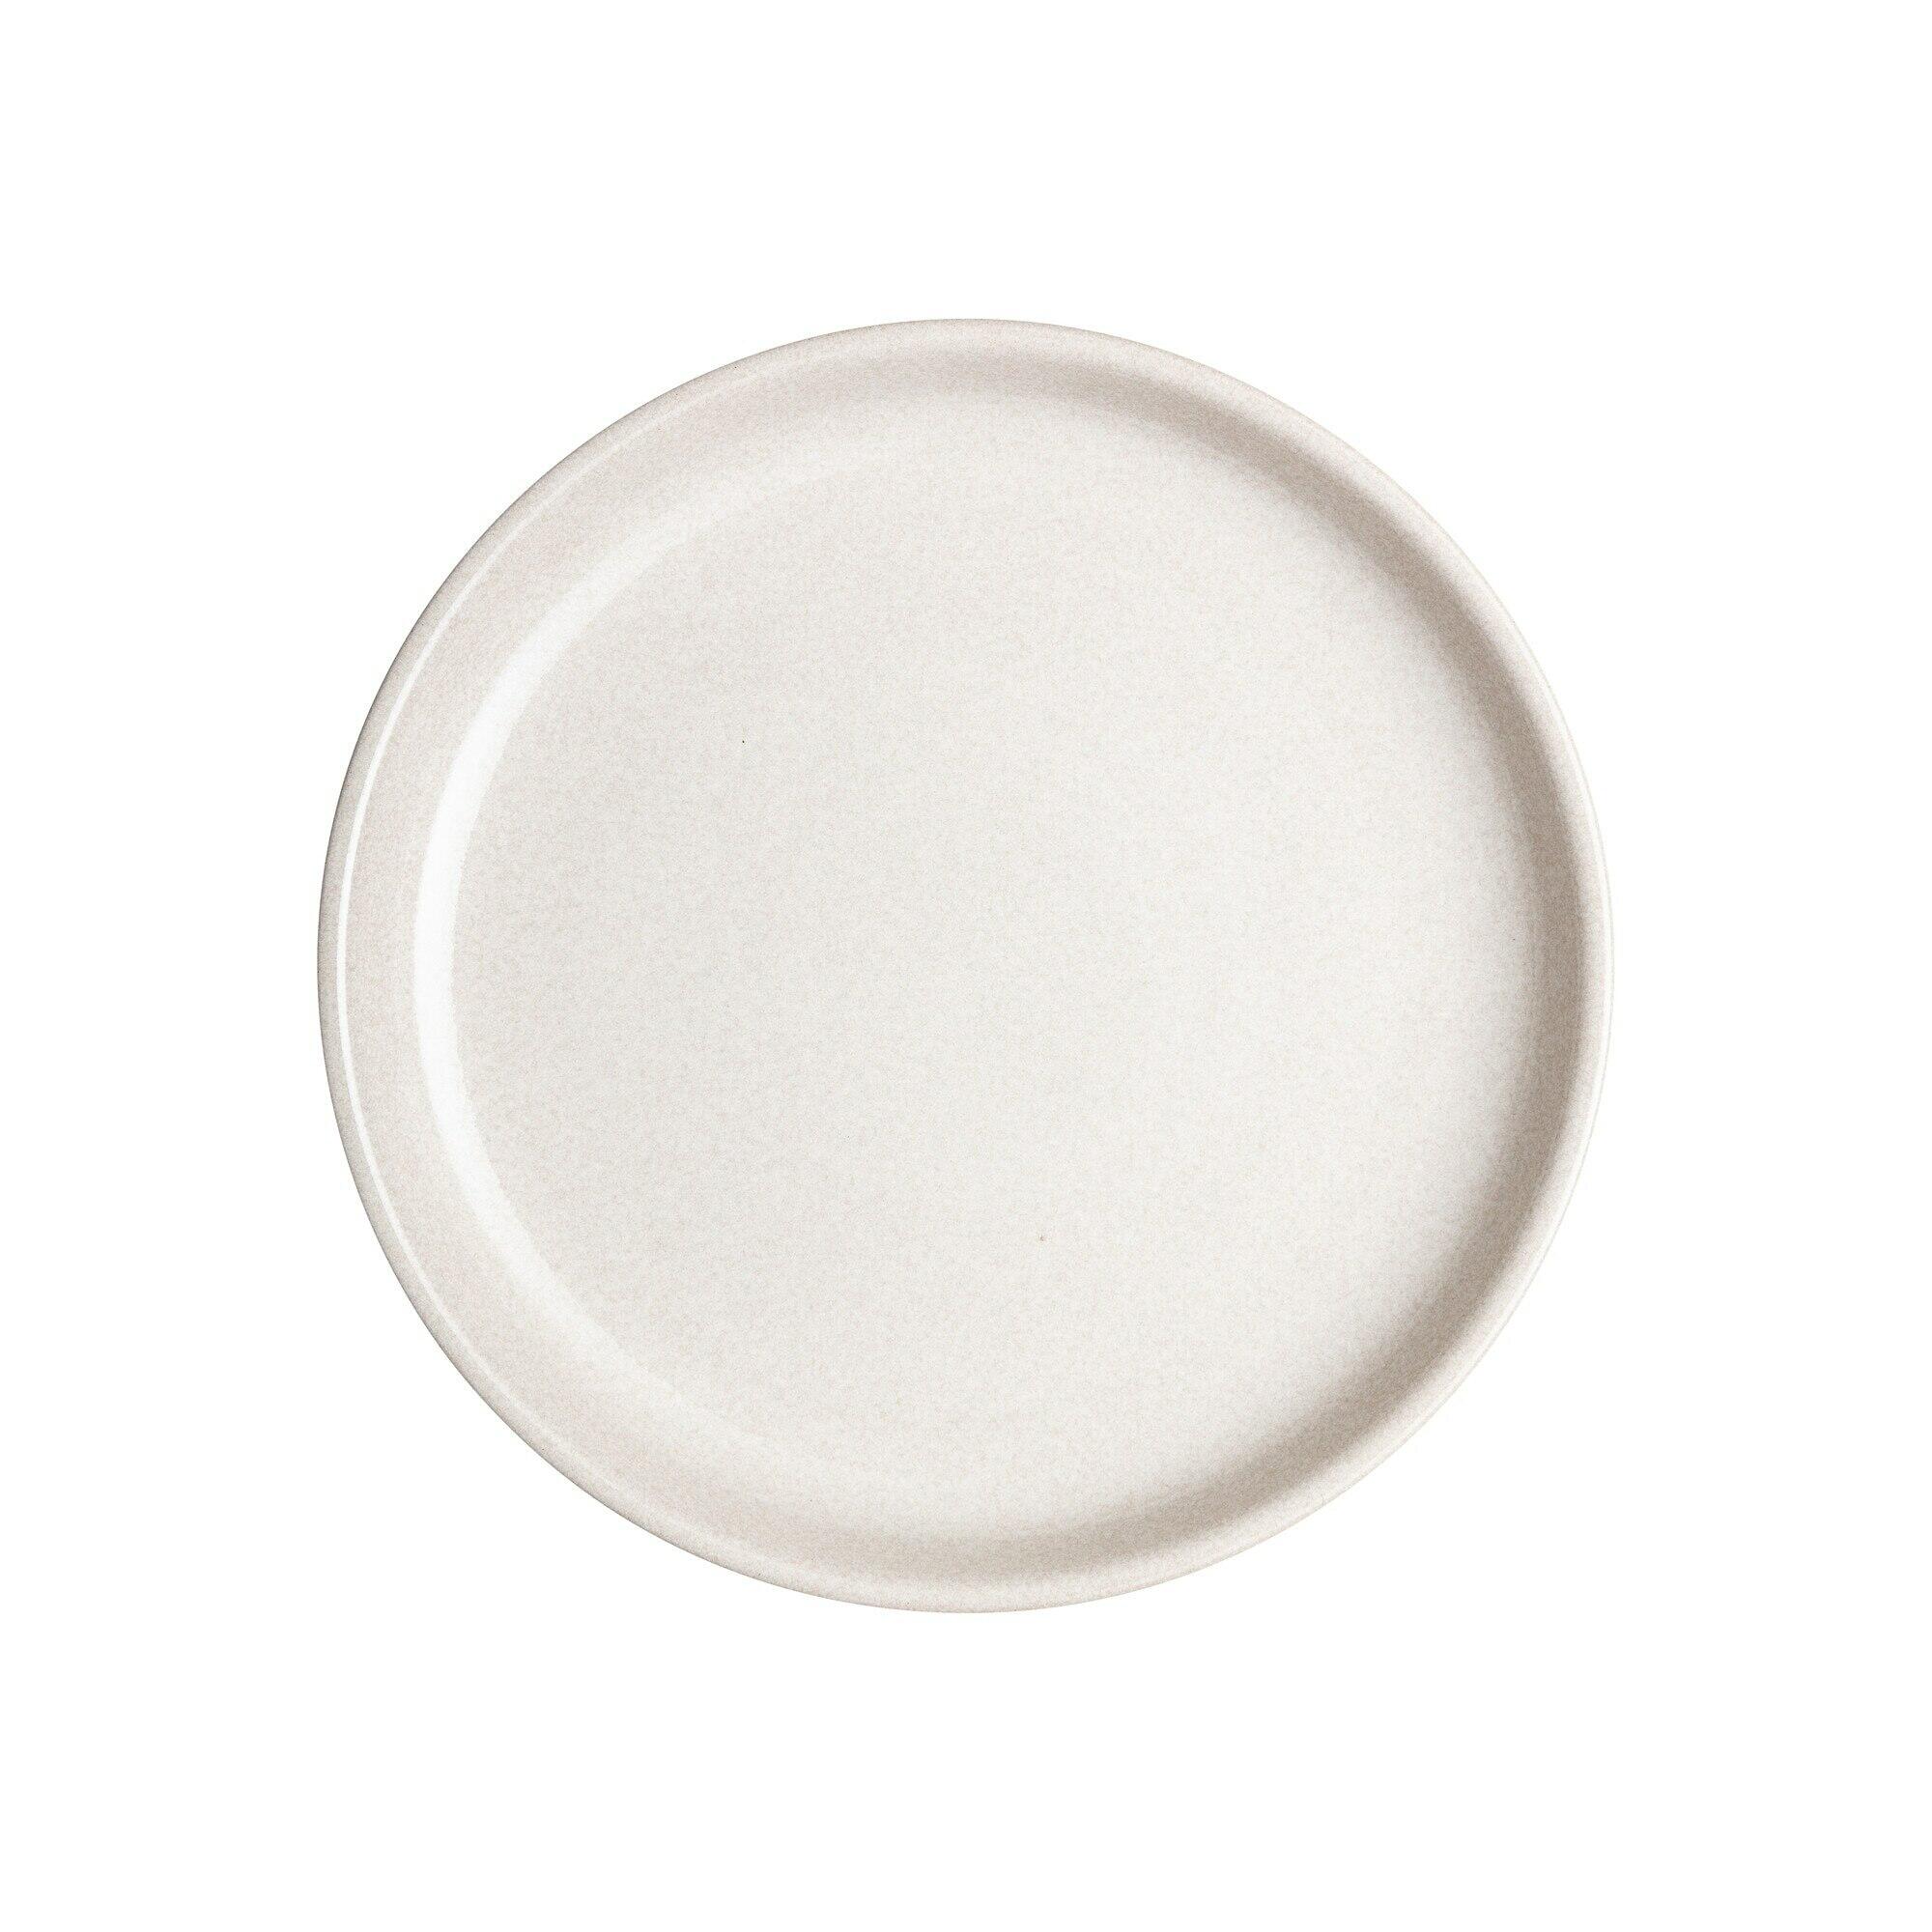 Elements Savannah White Small Coupe Plate Seconds